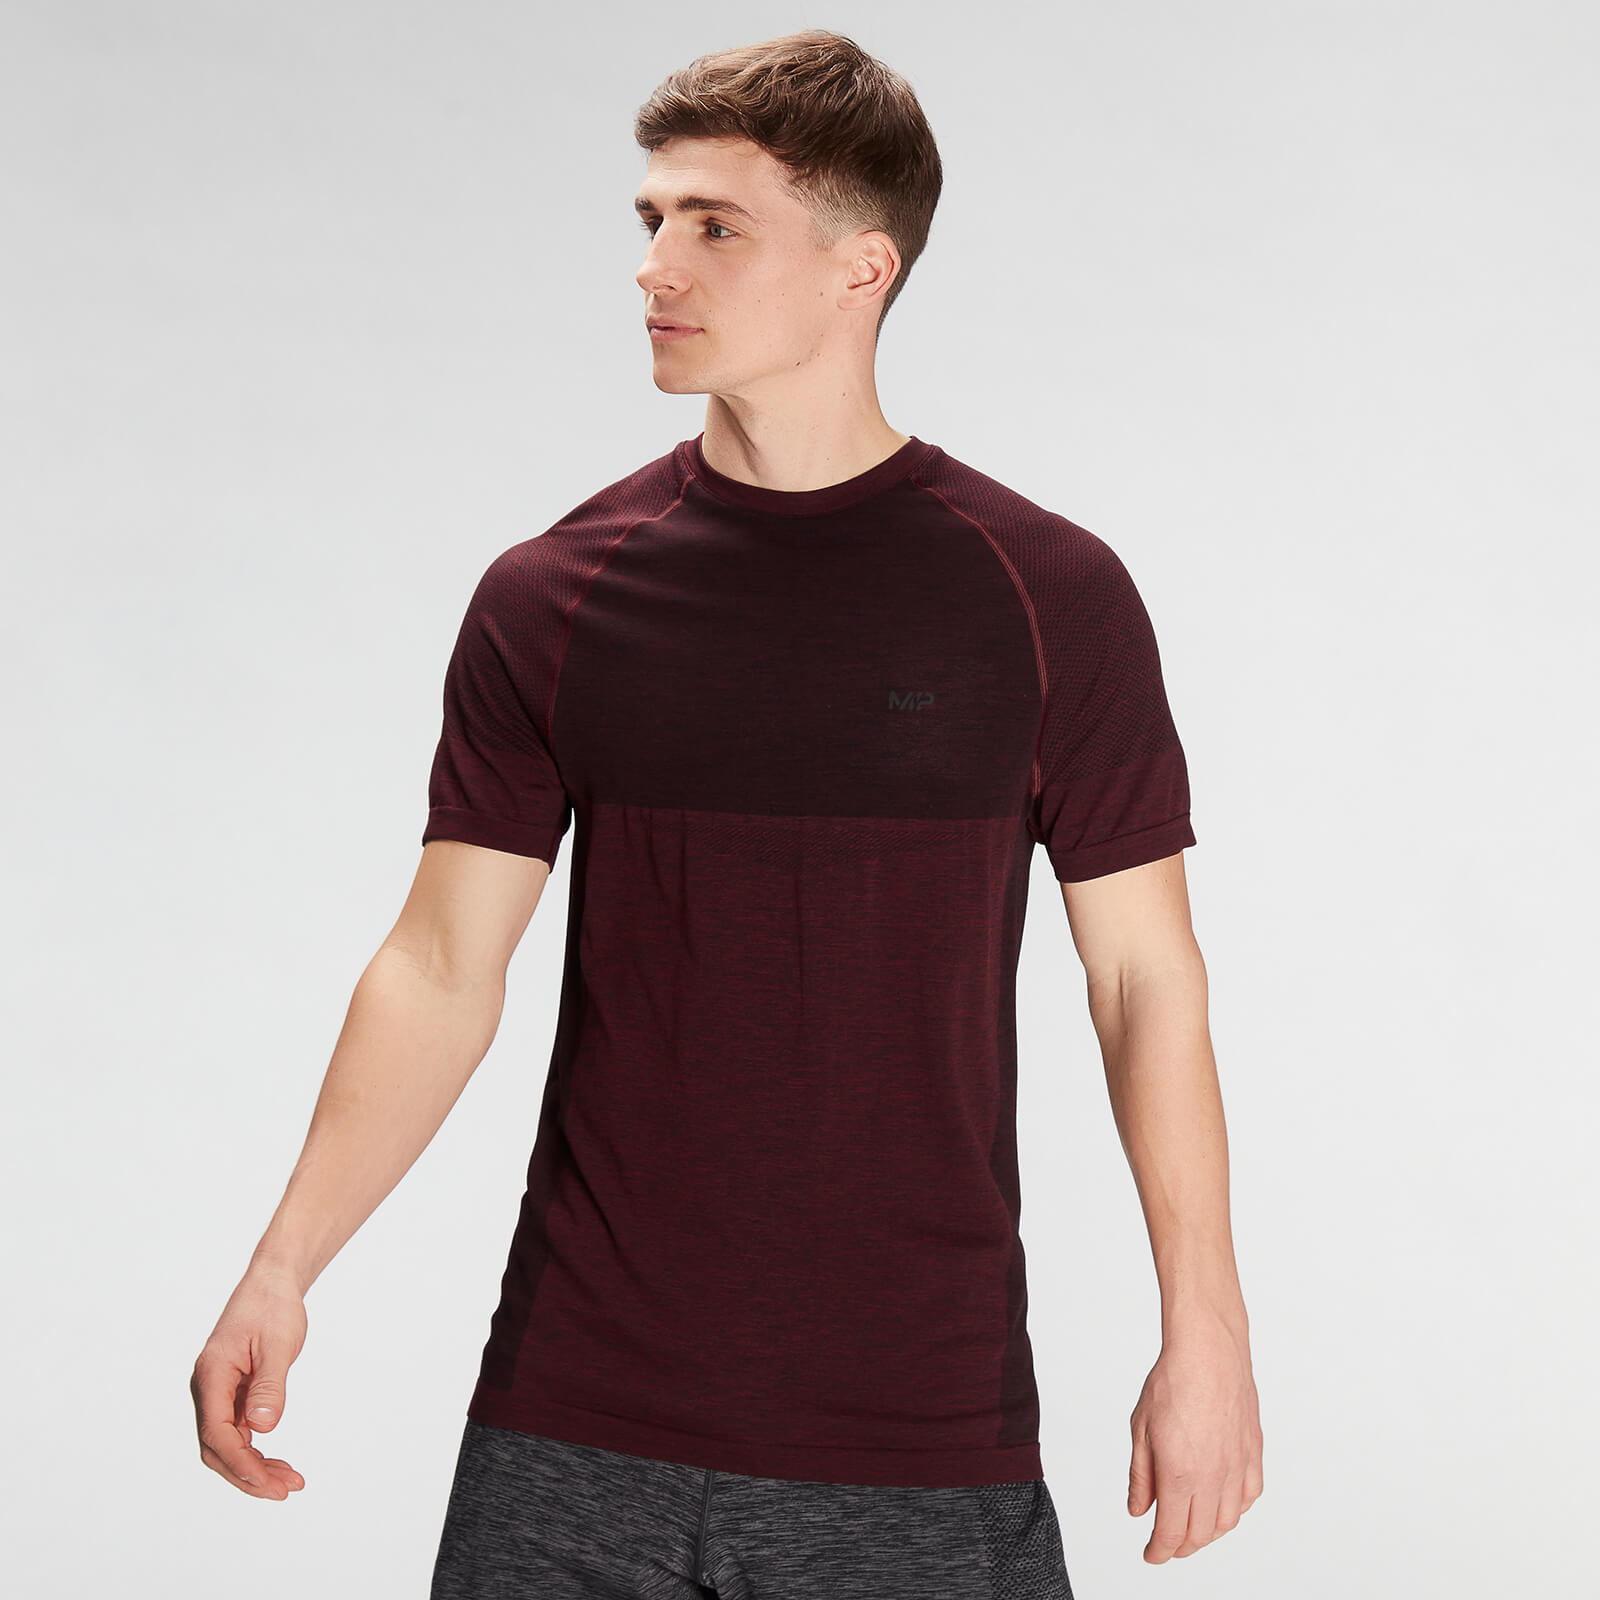 MP Men's Essential Seamless Short Sleeve T-Shirt- Washed Oxblood Marl - M